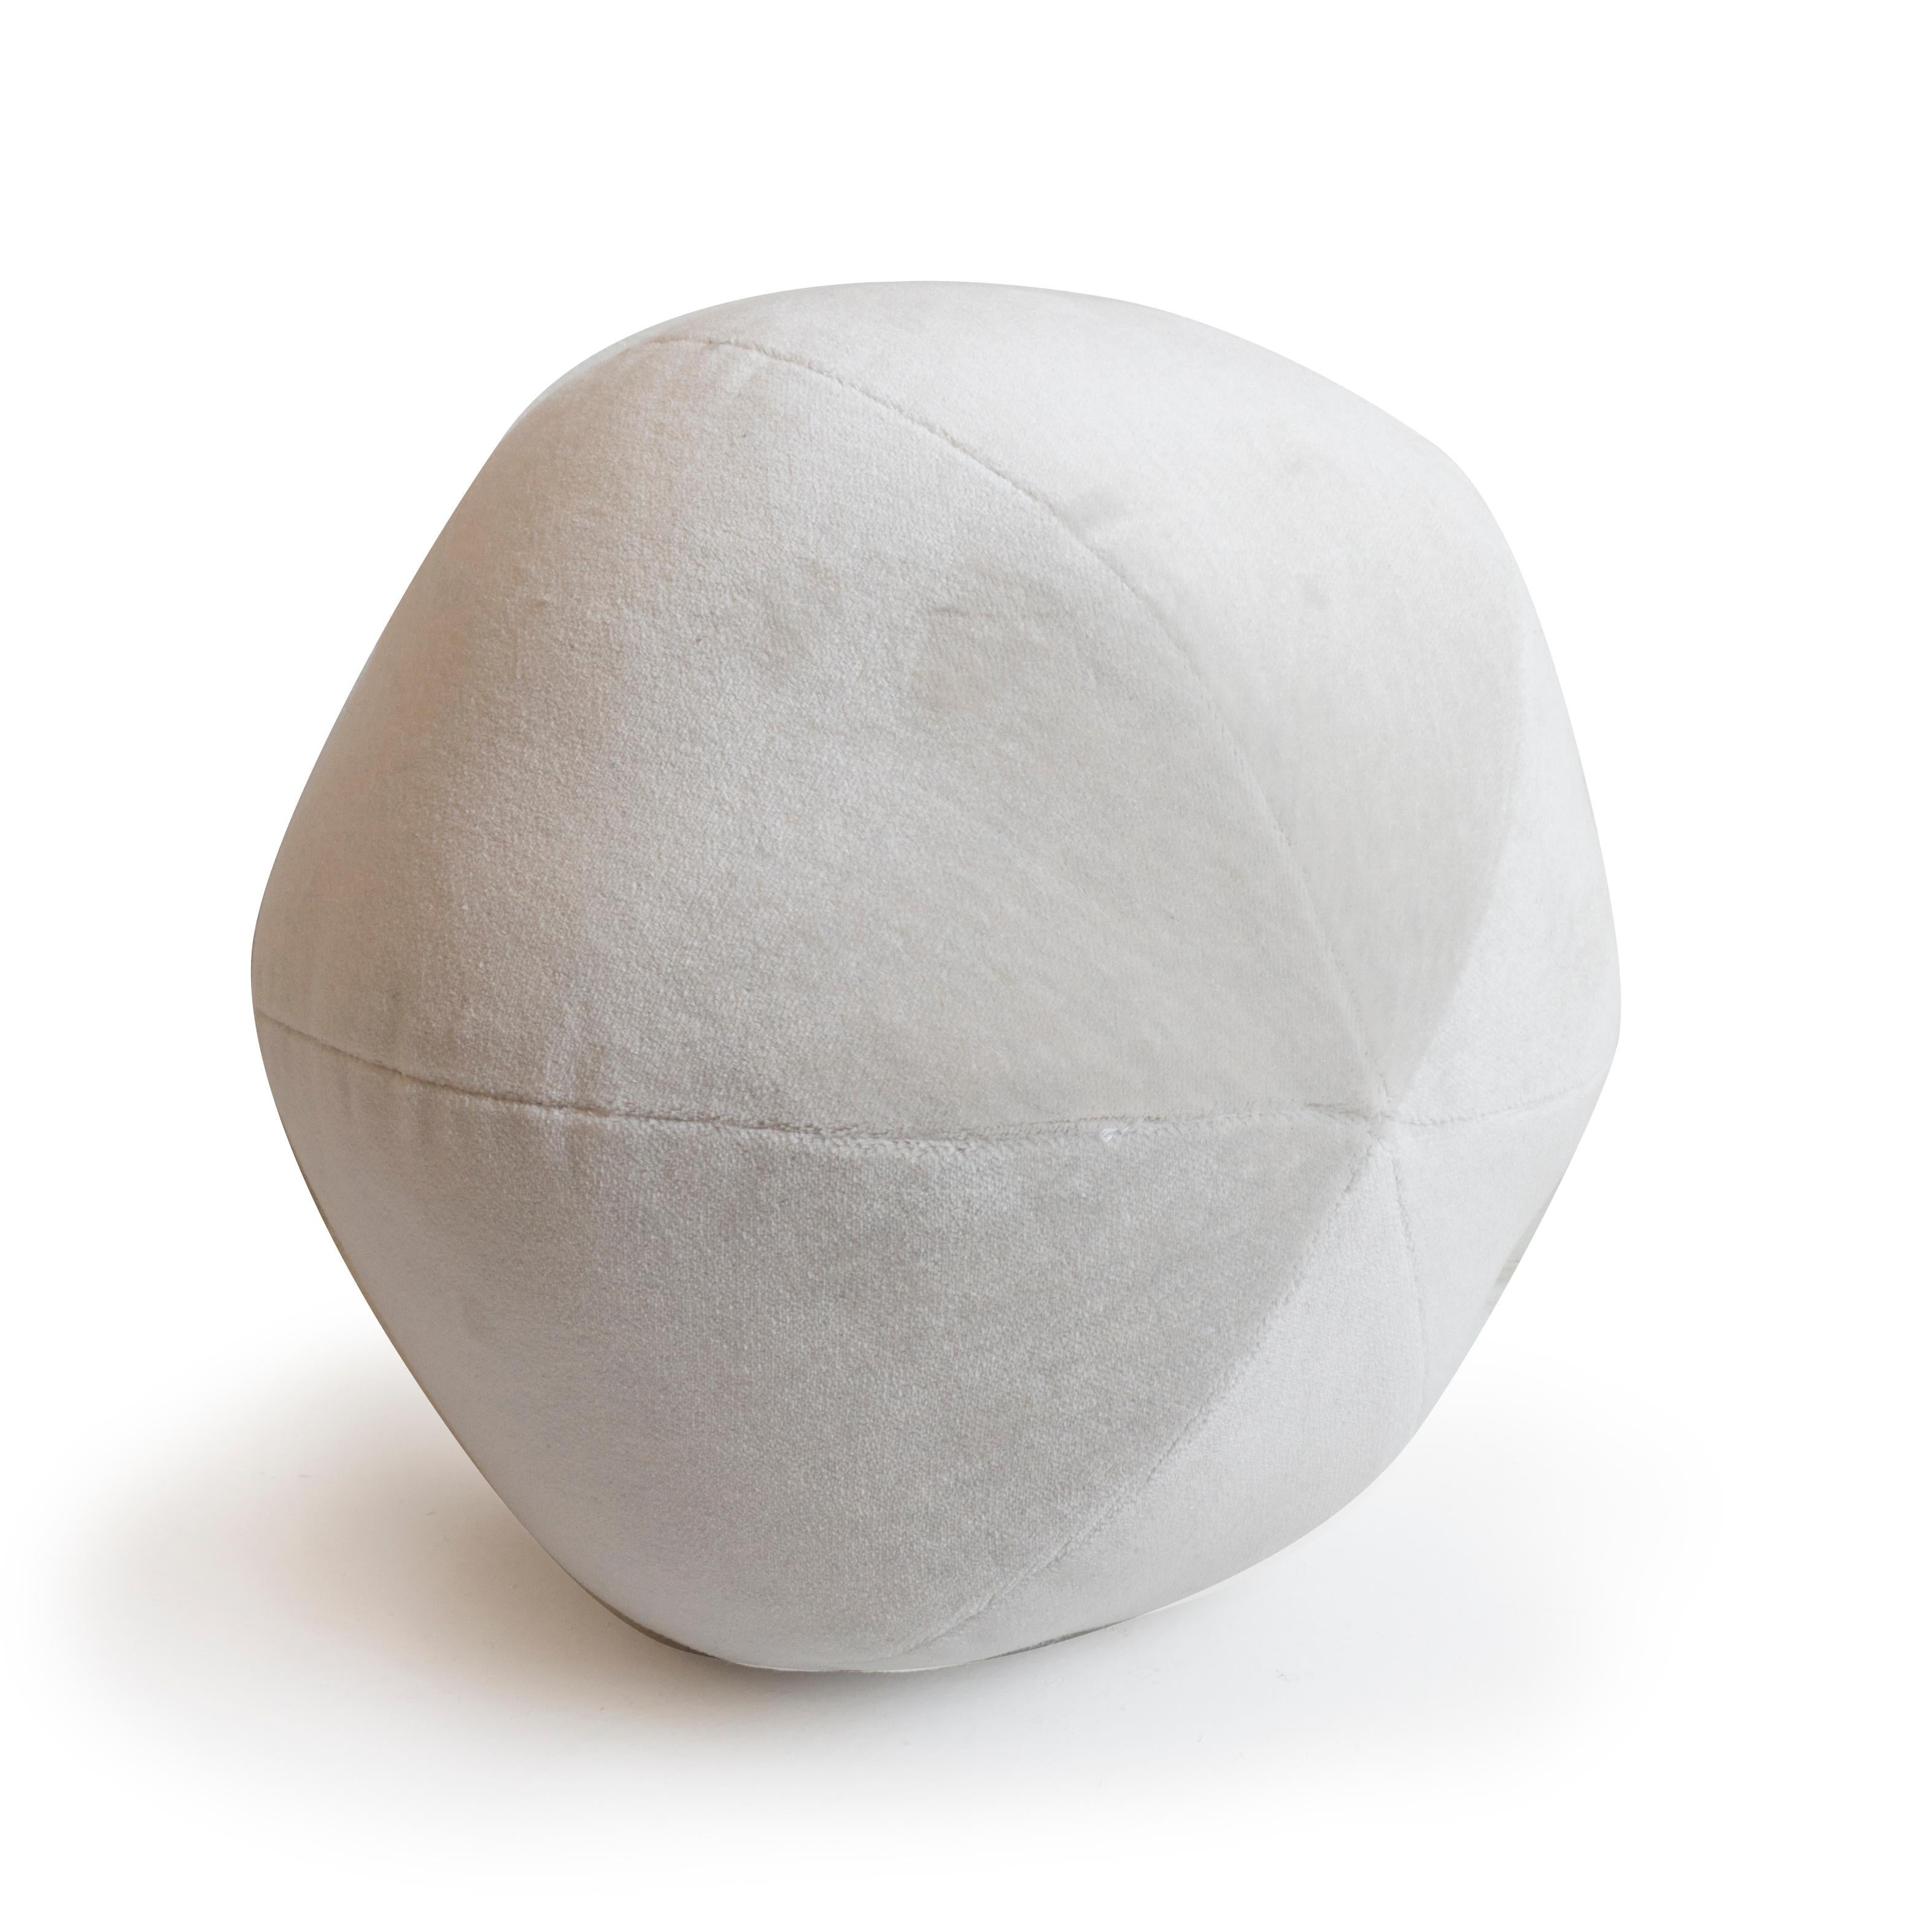 A round ball pillow hand sewn in a soft light grey fabric. 

Measurements: 9” height x 12” diameter.